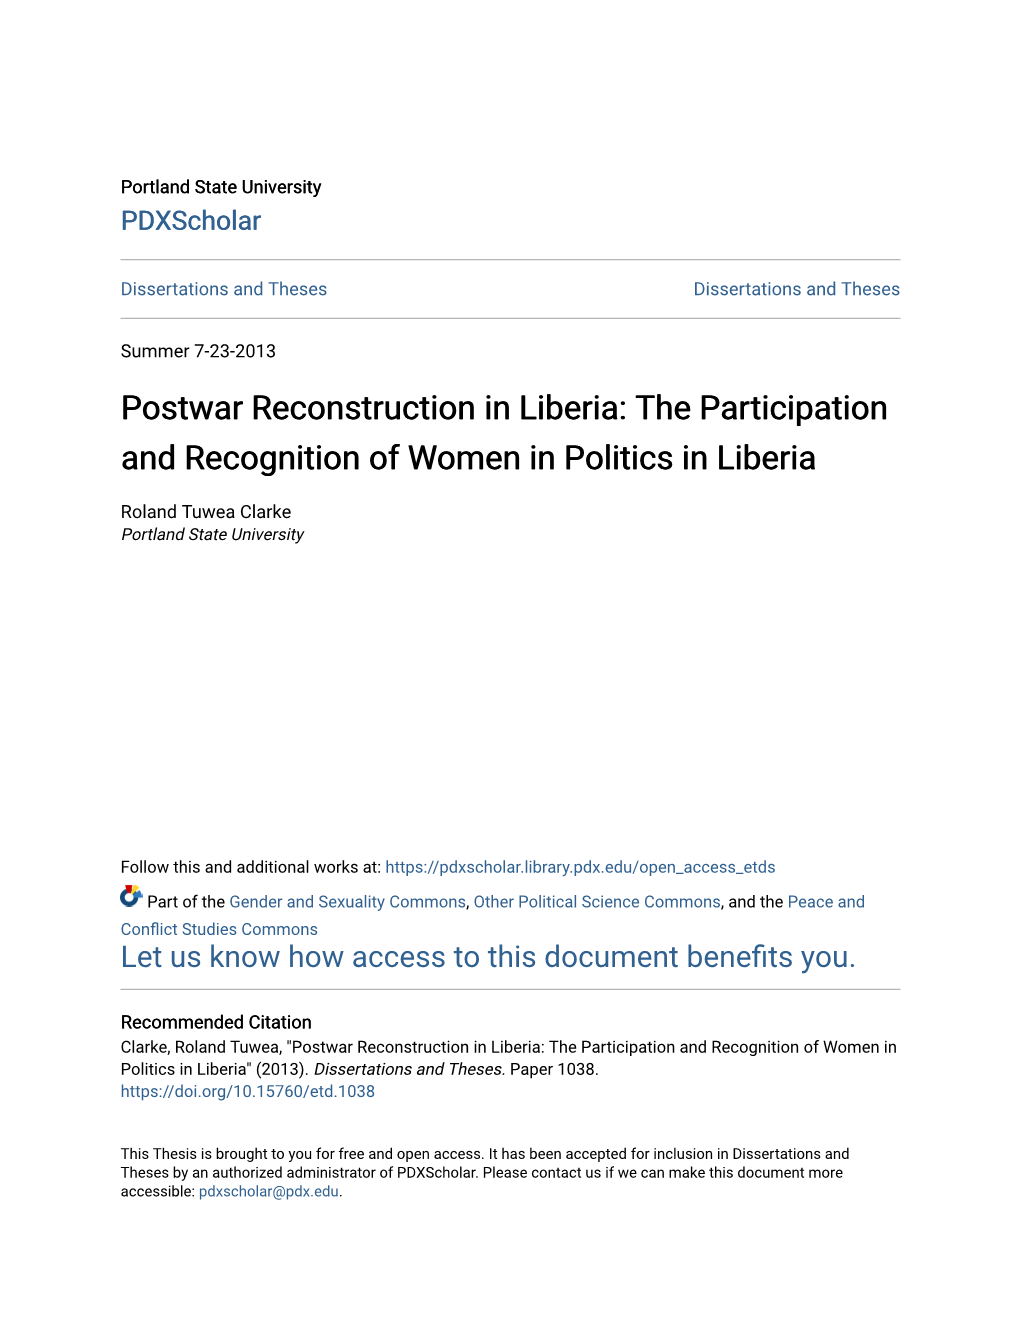 Postwar Reconstruction in Liberia: the Participation and Recognition of Women in Politics in Liberia